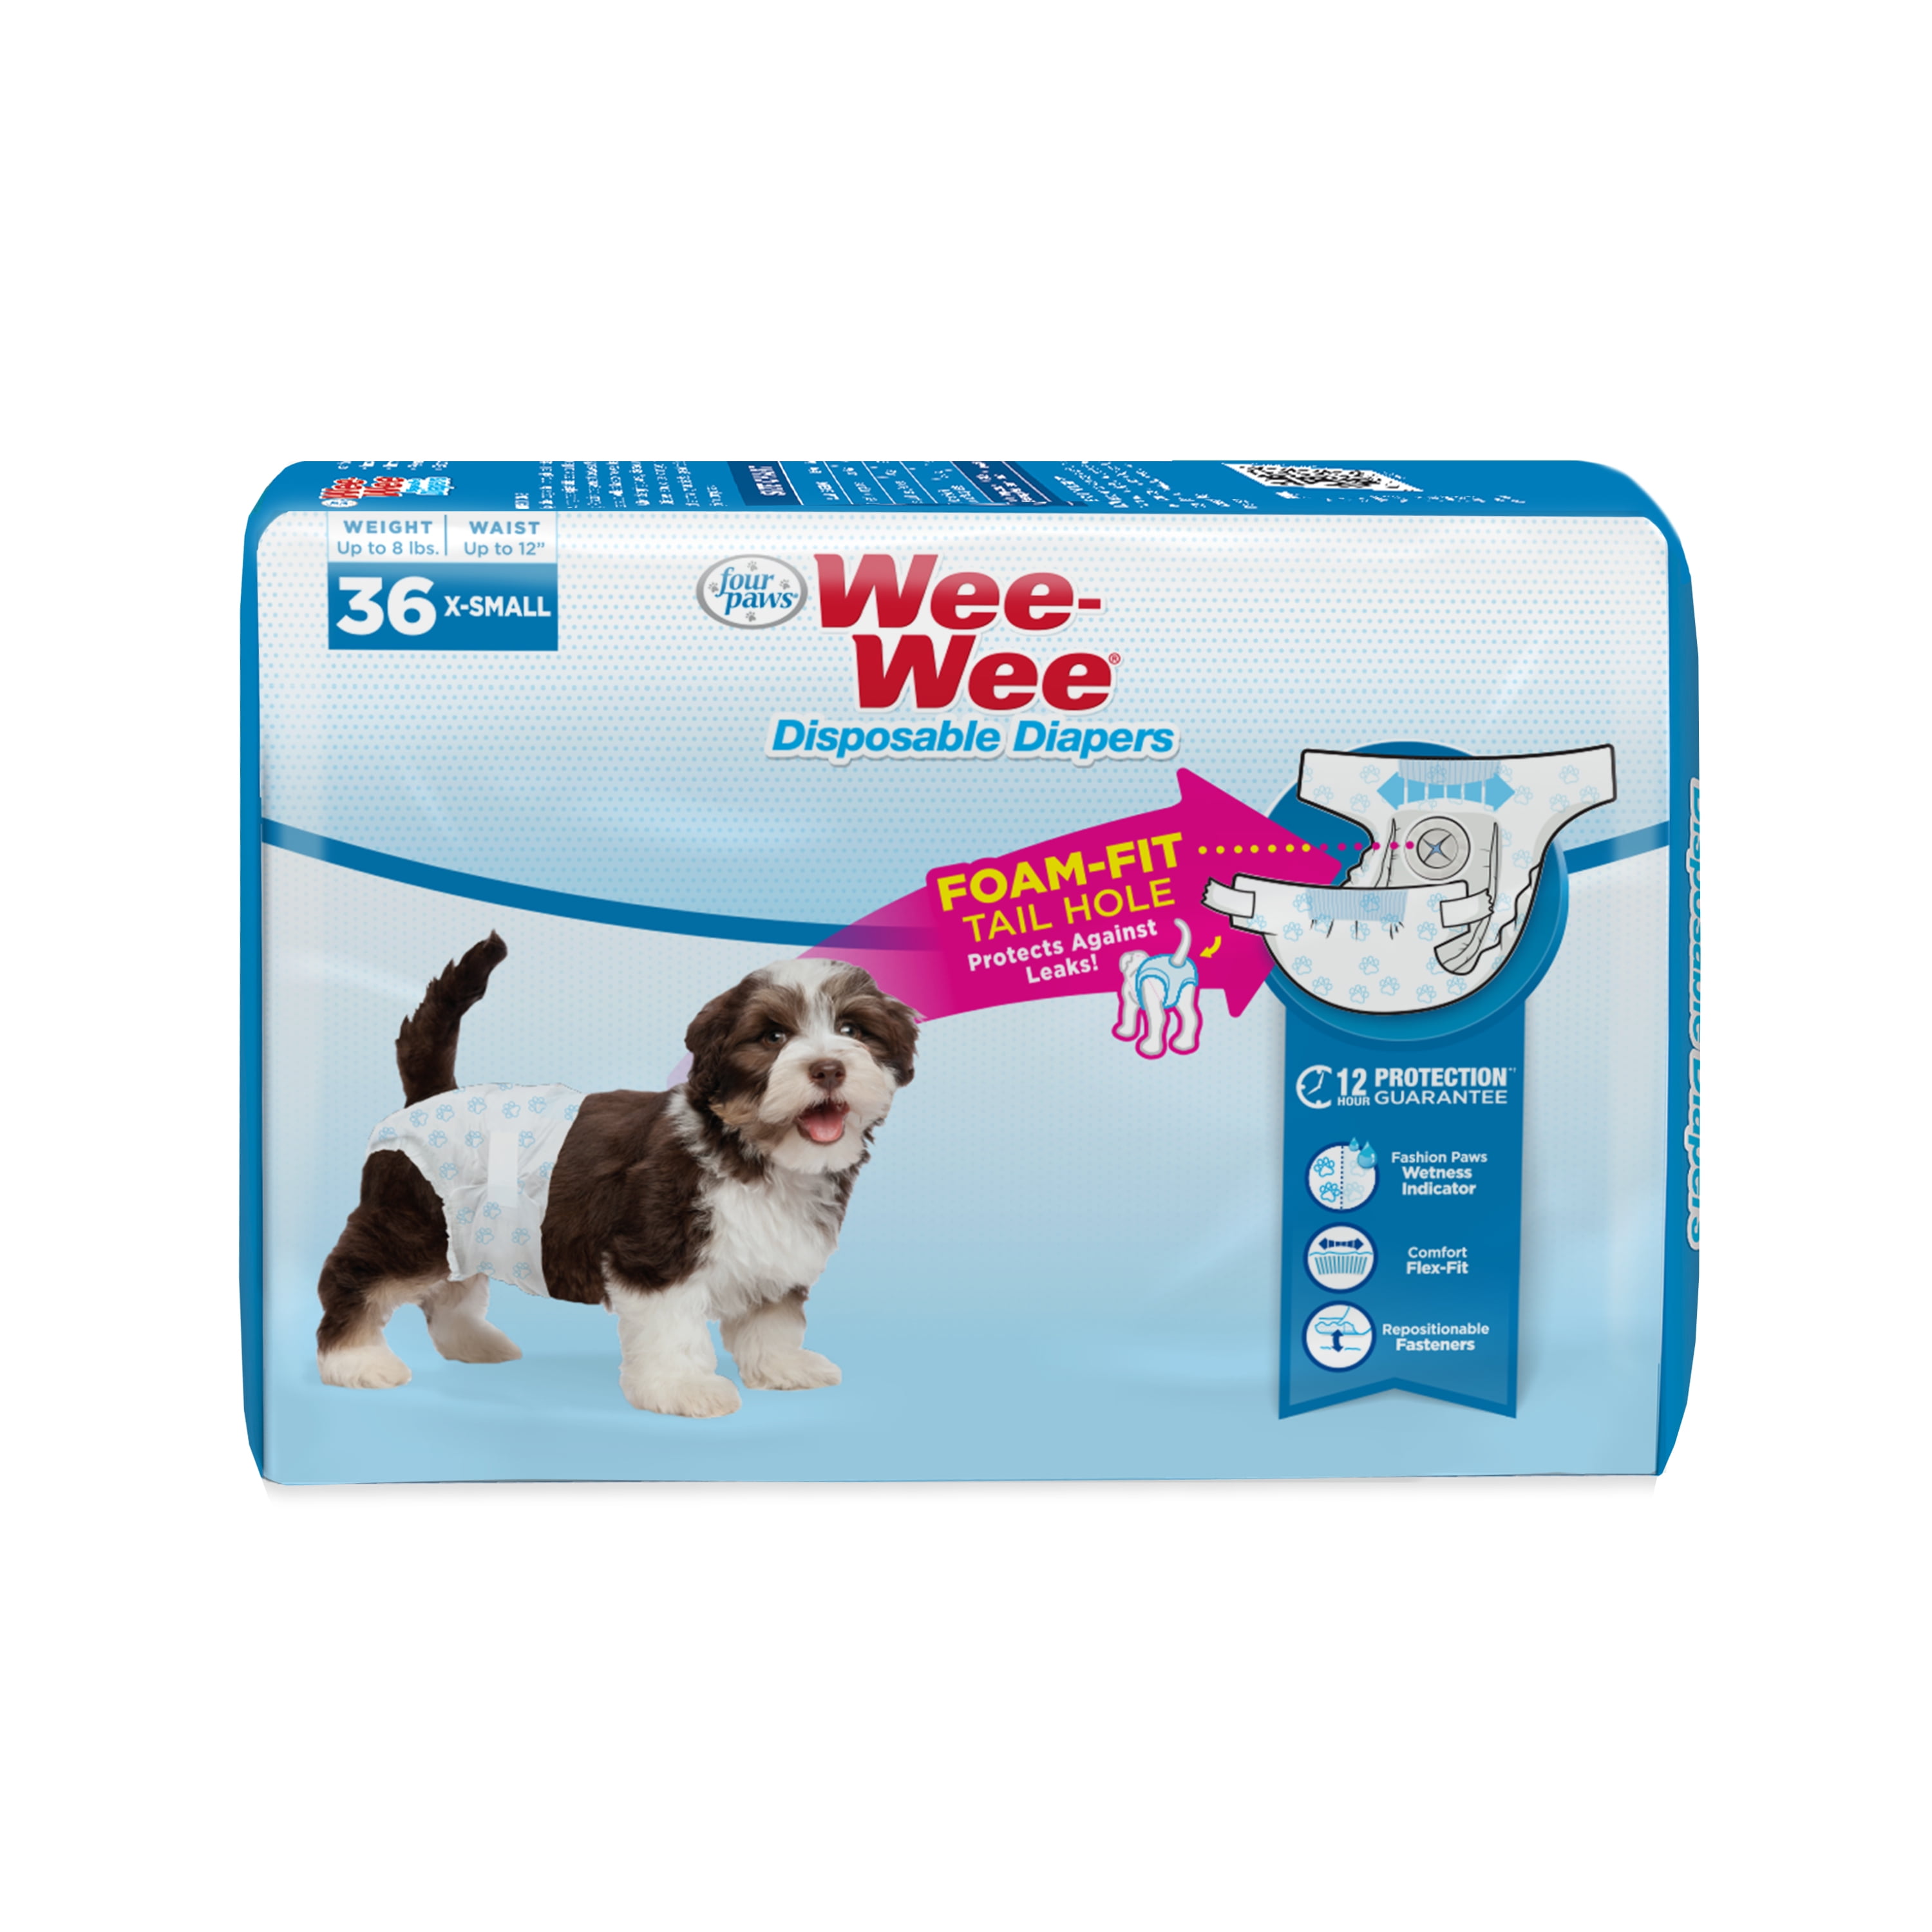 Picture of Four Paws Products 100534950 Wee-Wee Disposable Diapers - 36 Count